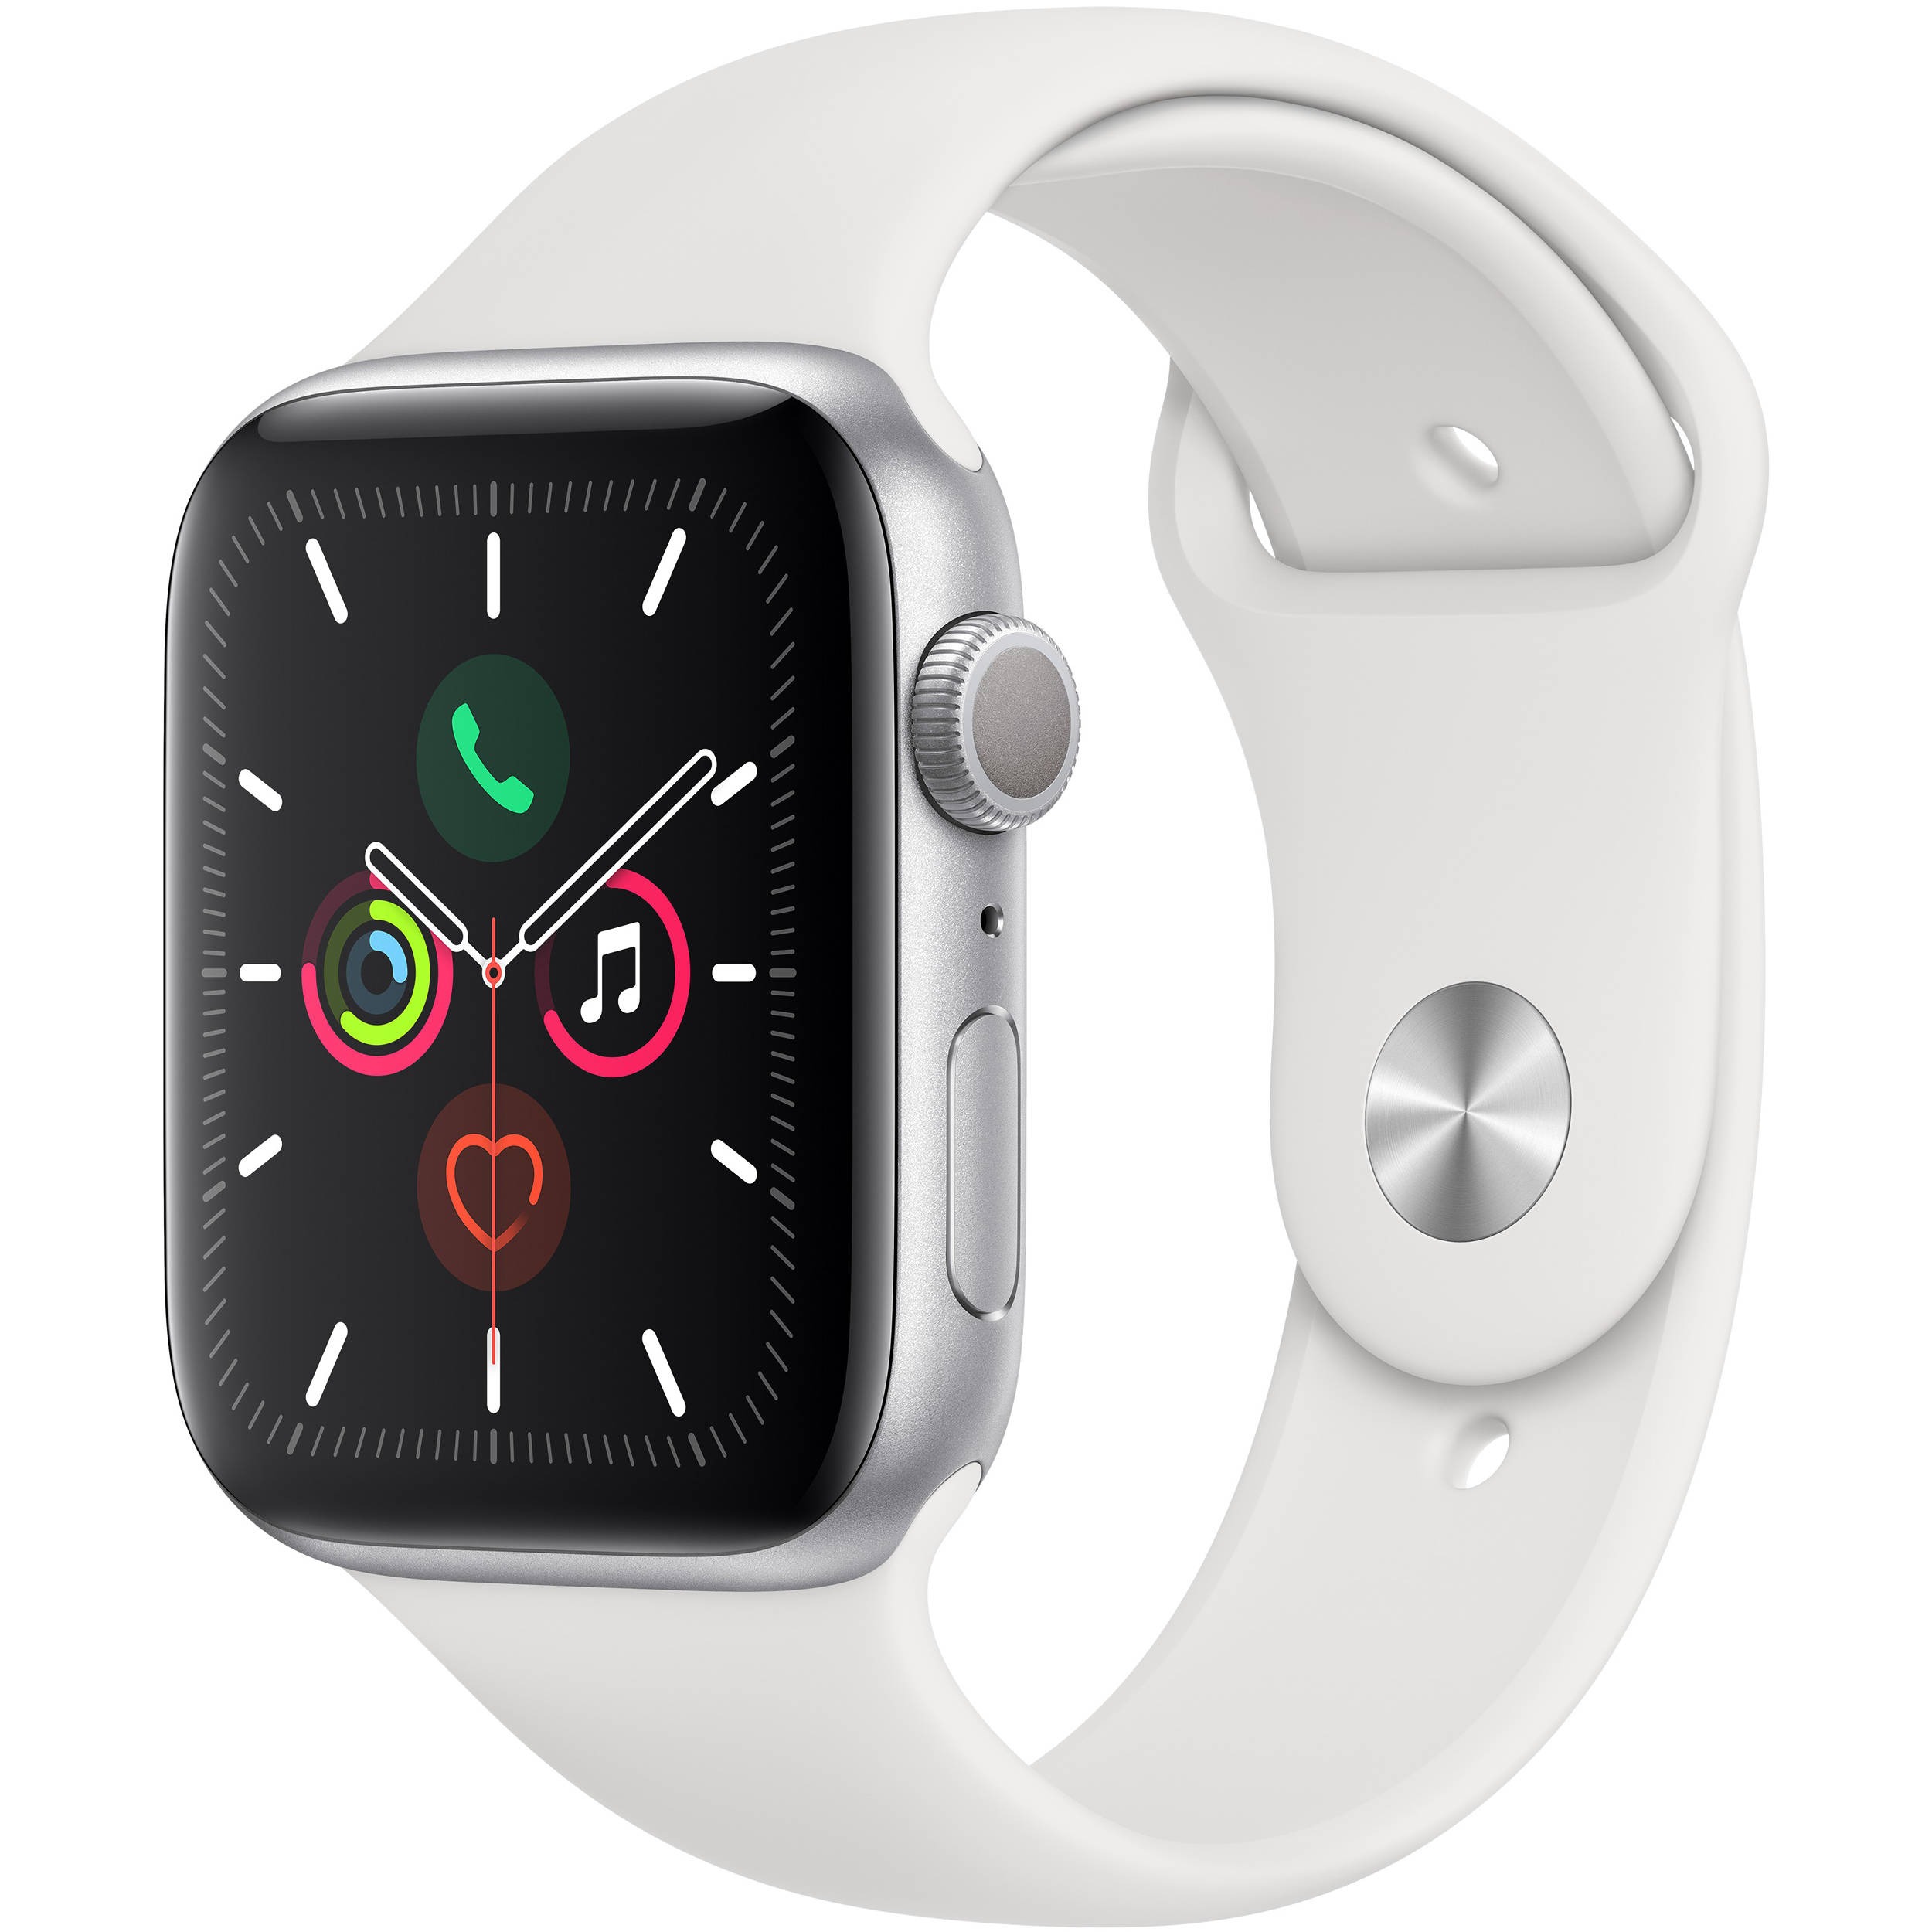 Apple Watch Series 6 Spotted Online for the First Time